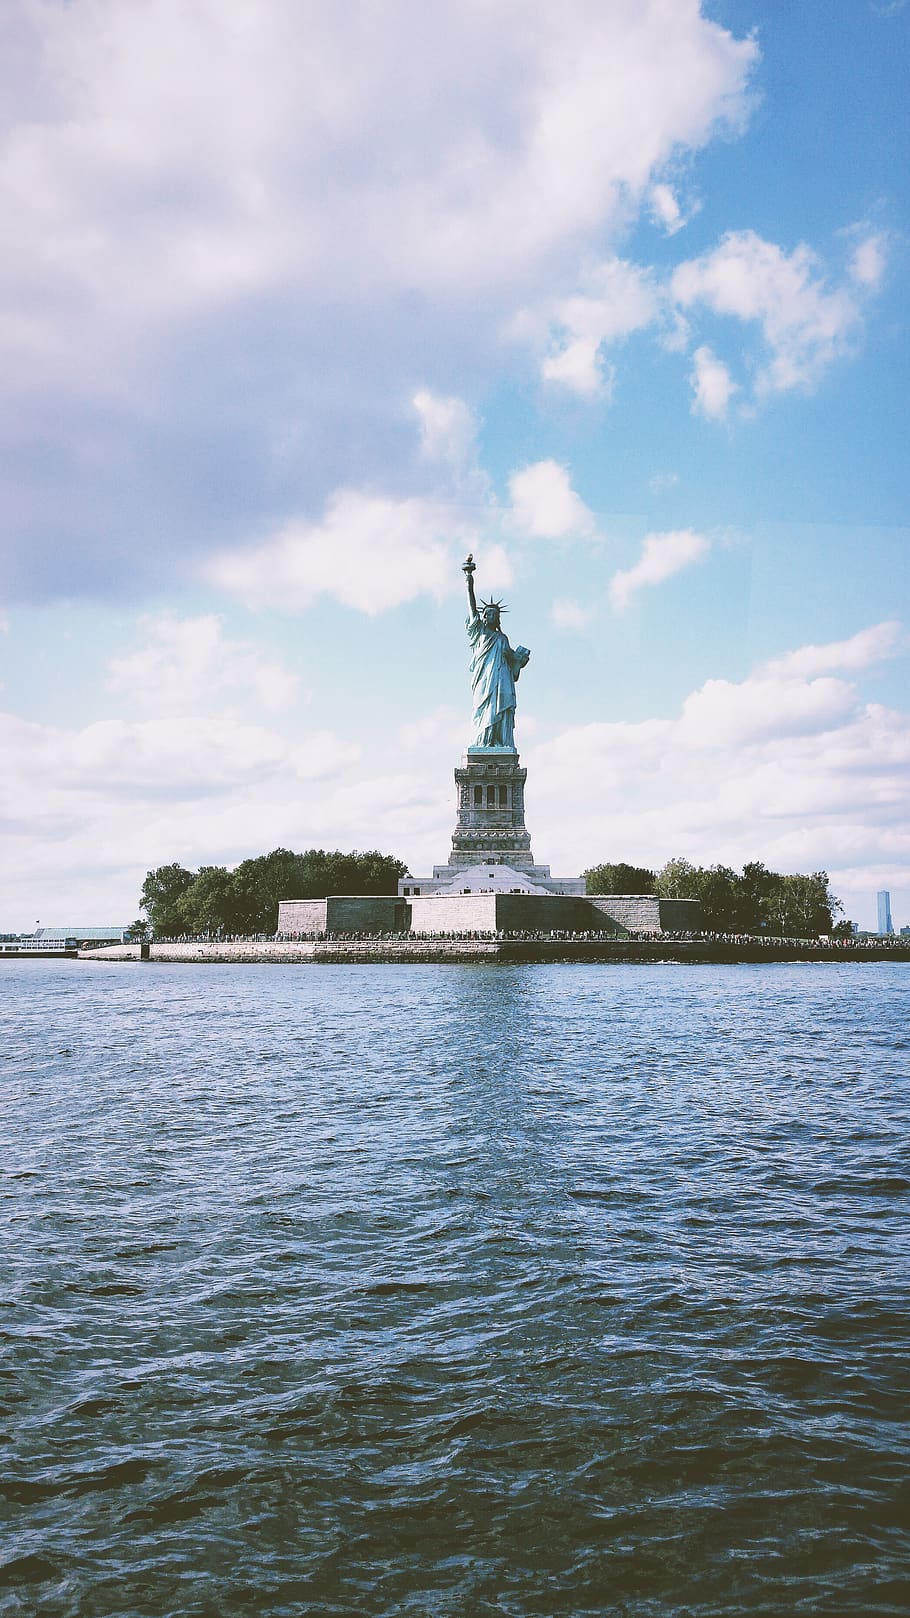 Statue of Liberty, New York Harbour, lady liberty, independence